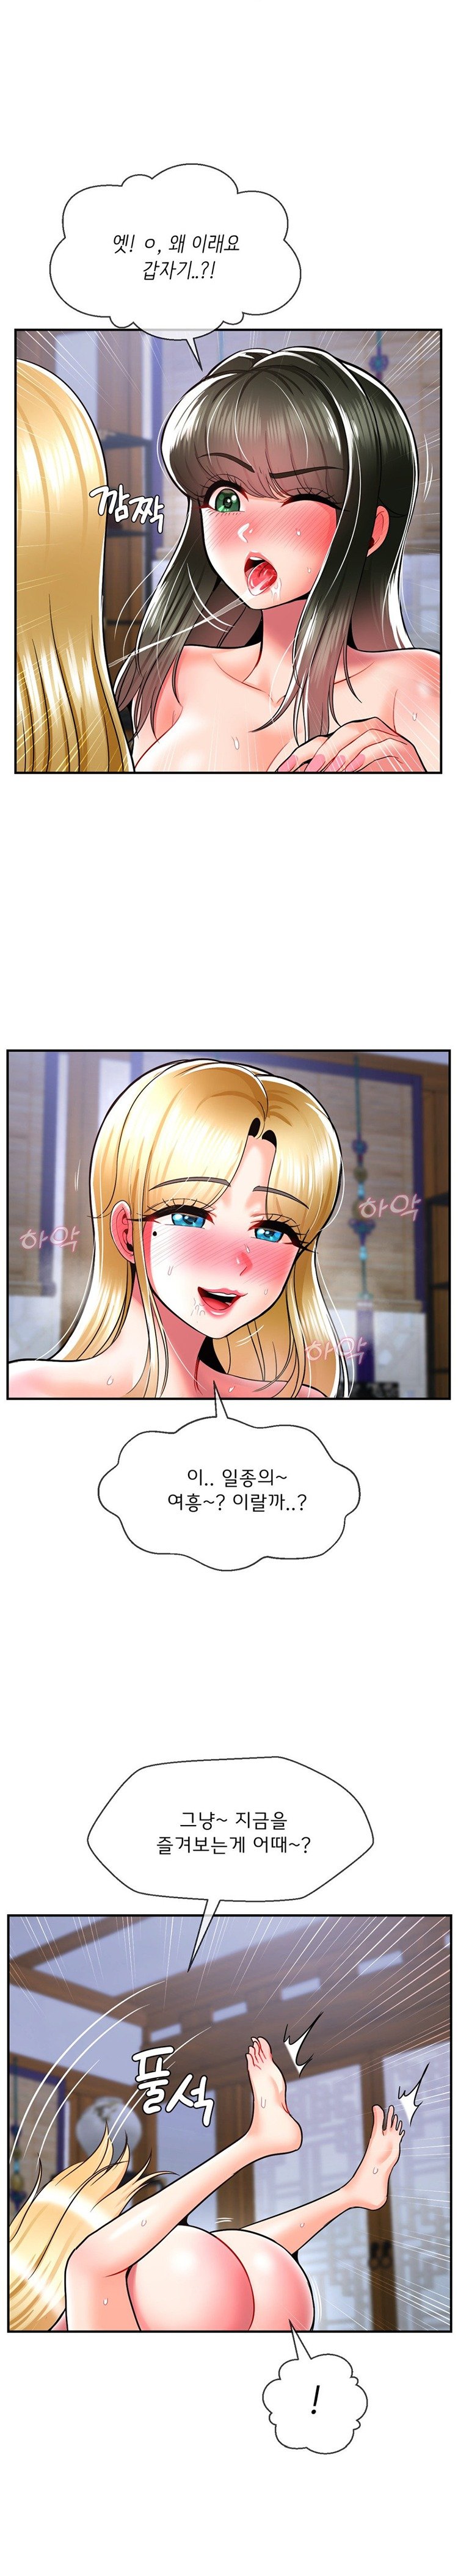 seventeenth-only-son-raw-chap-36-18